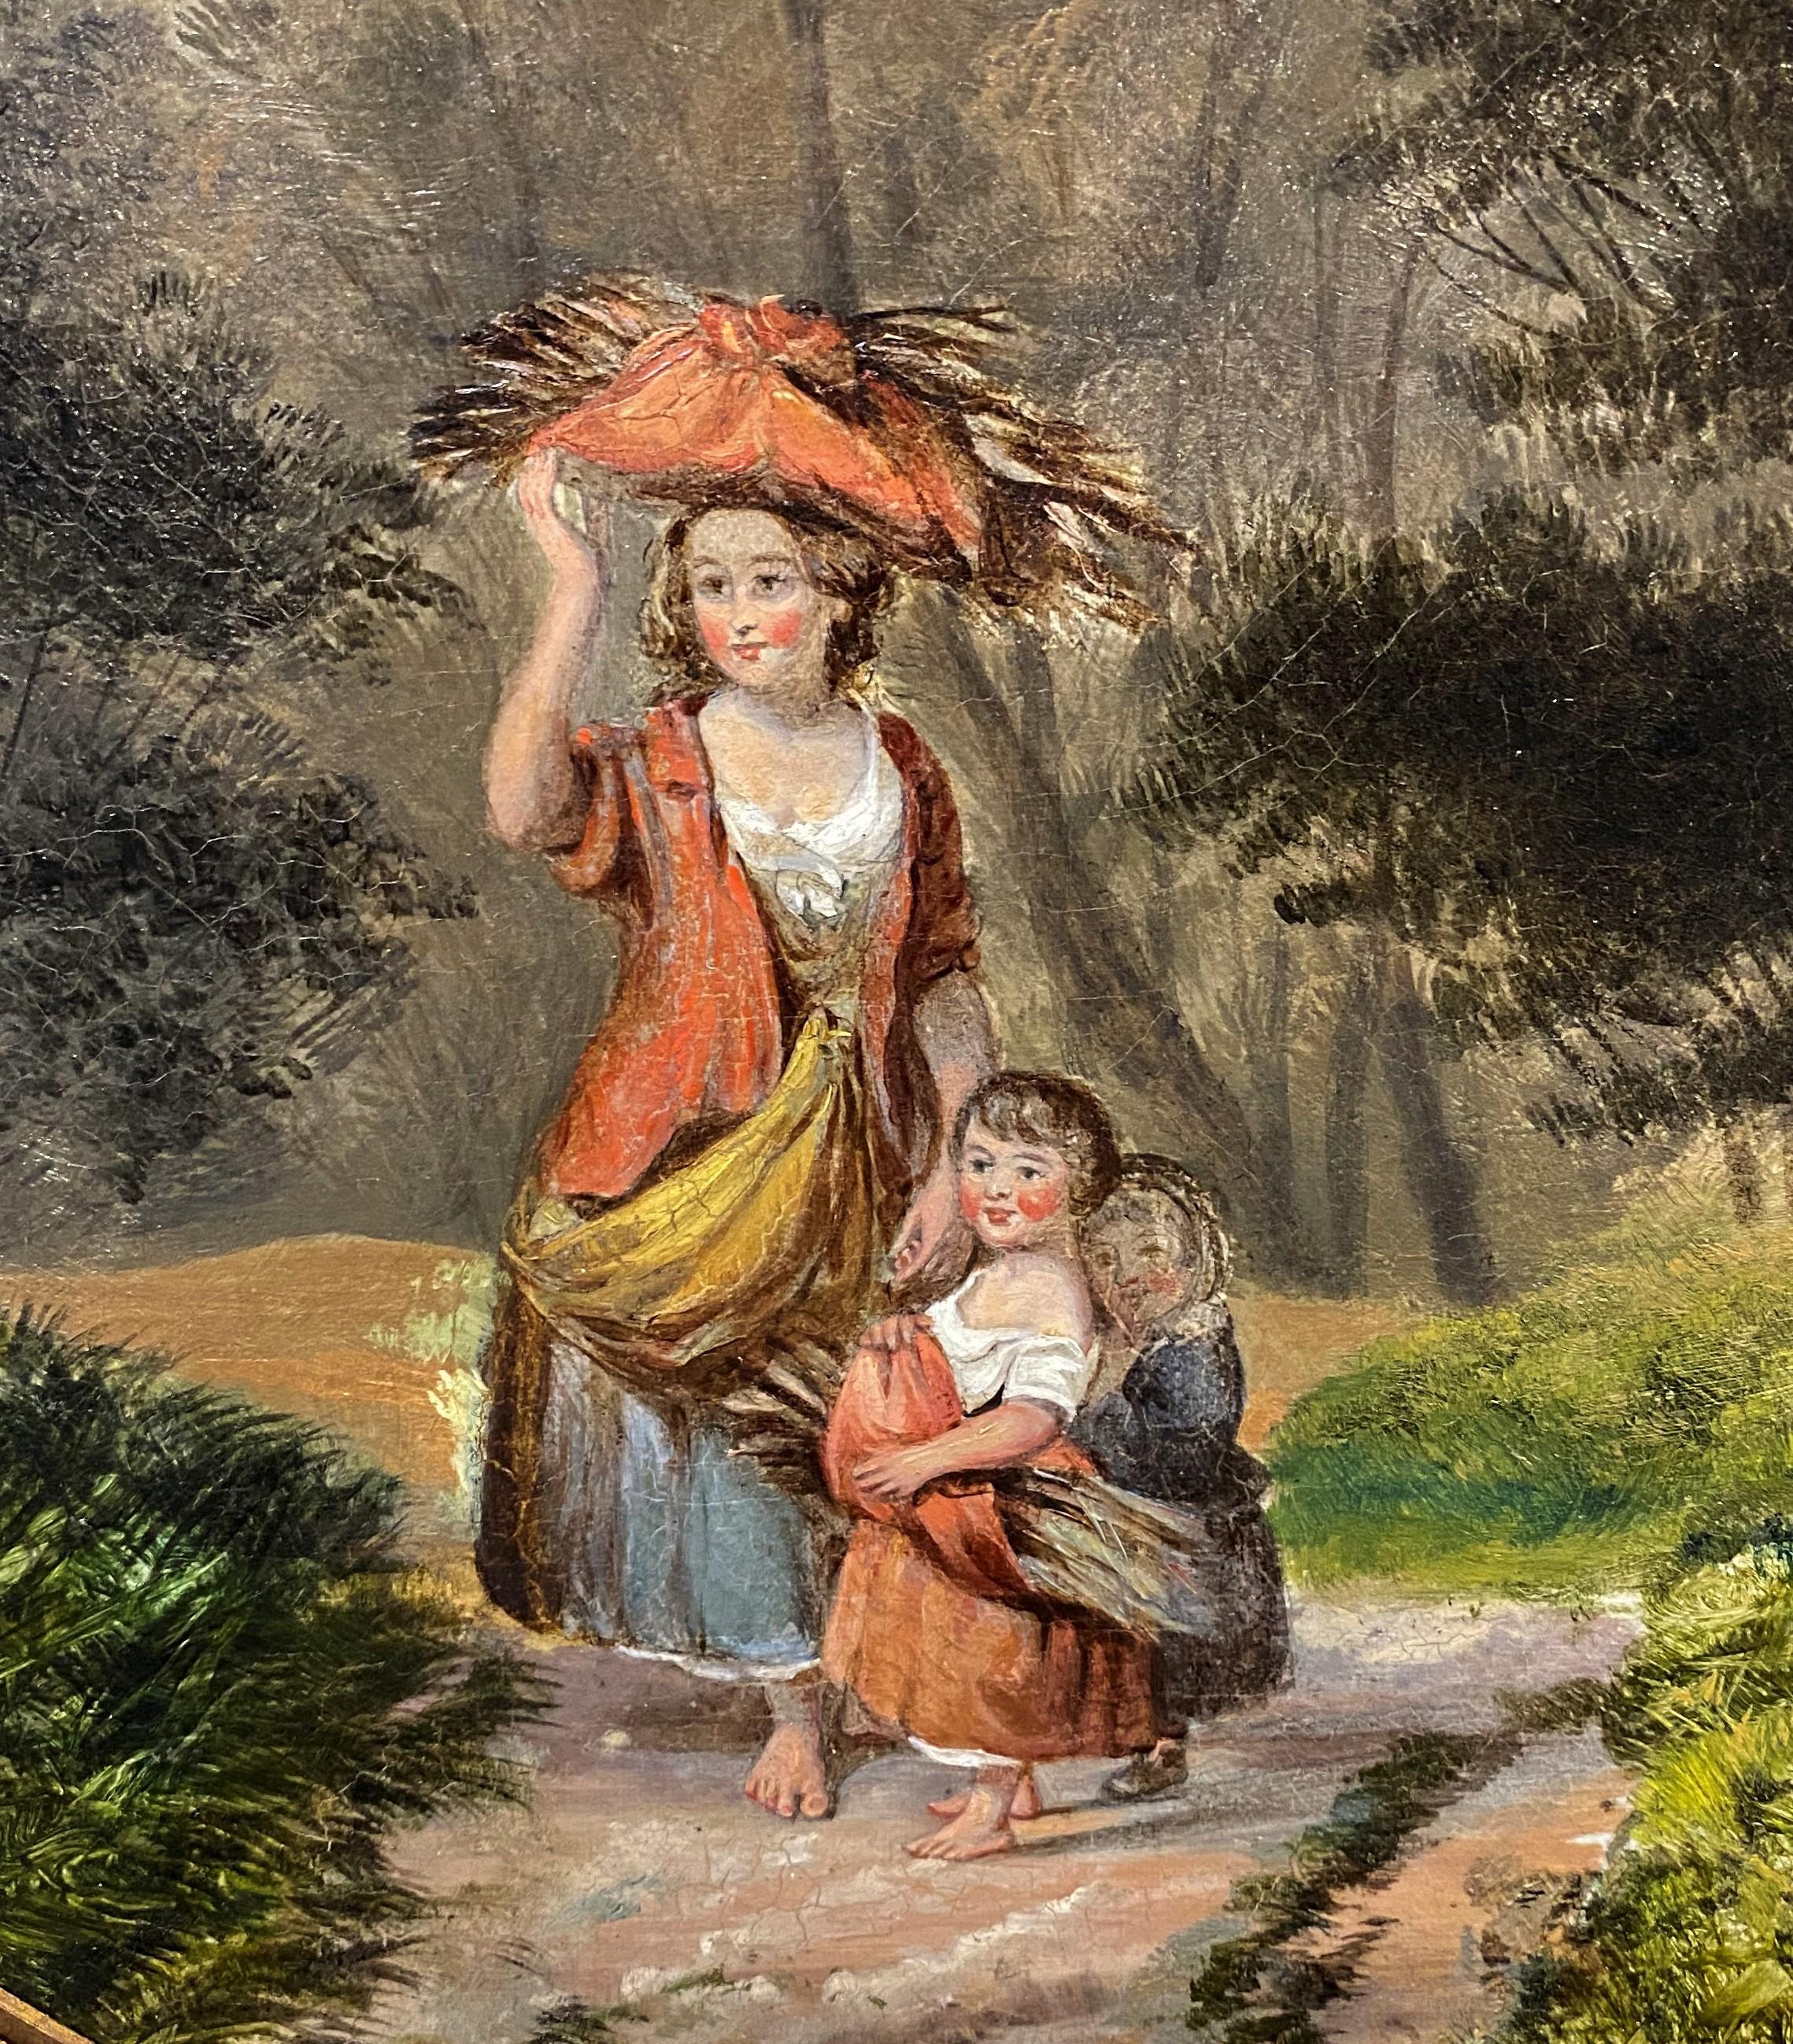 A fine oil painting of a mother and her children gathering kindling on a country road, with artist placard lower center “Wm Shayer, 1788-1879,” most likely painted by a follower or pupil of the artist. Shayer was born in Southampton, England and was